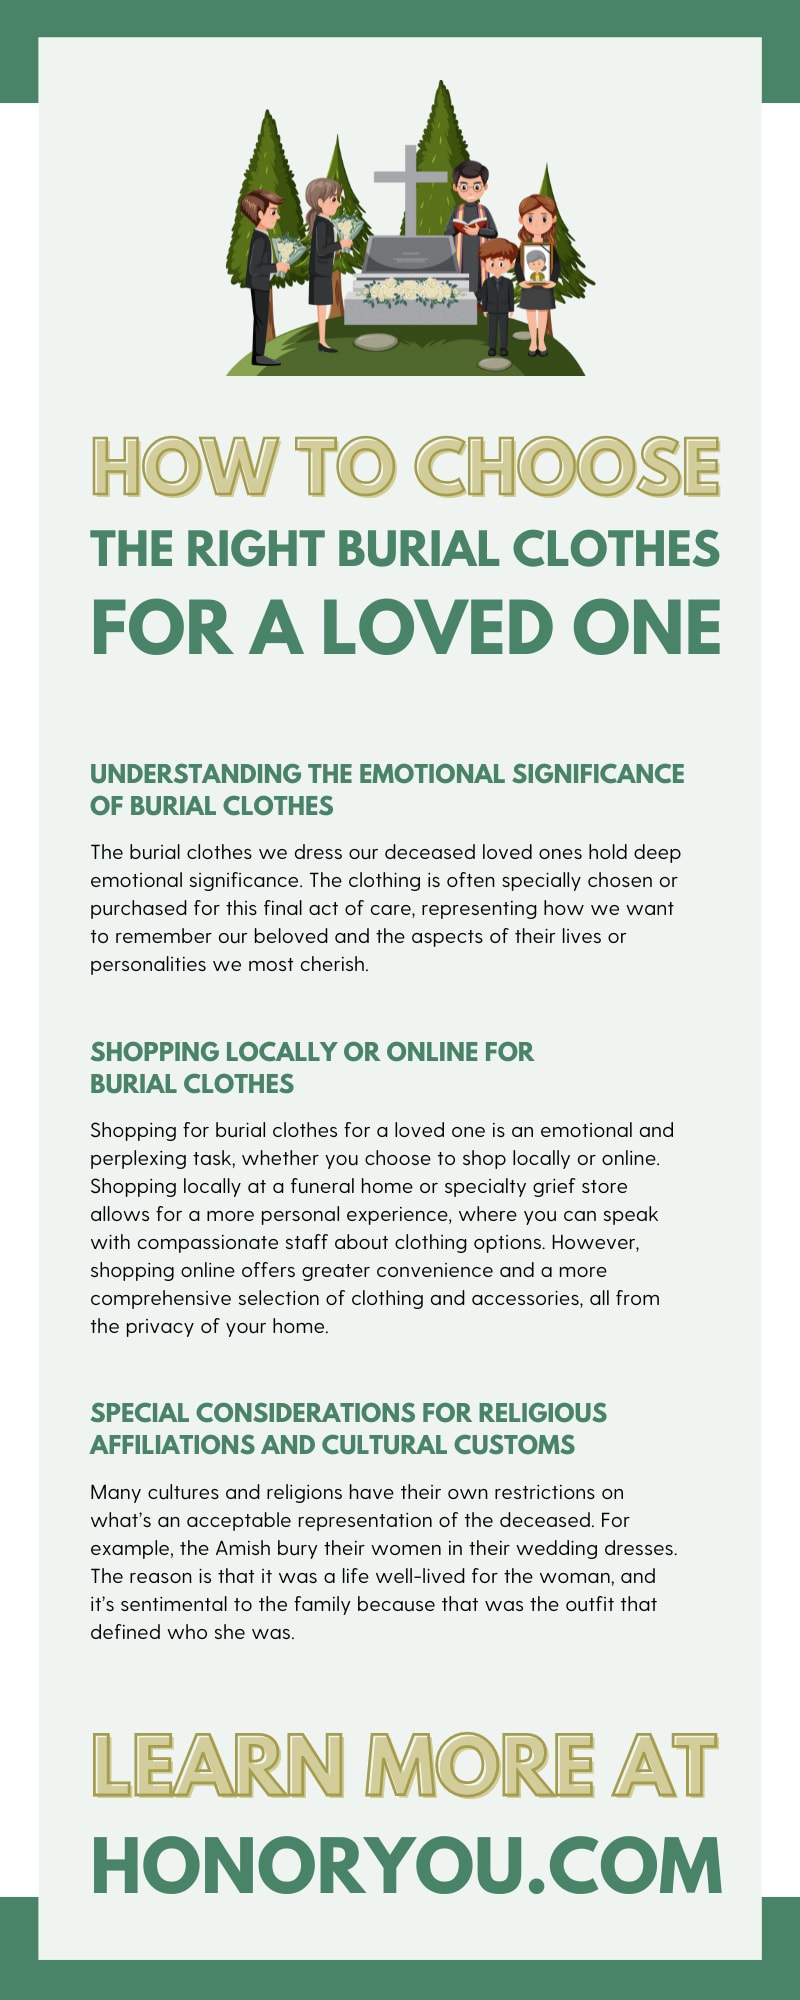 How To Choose the Right Burial Clothes for a Loved One